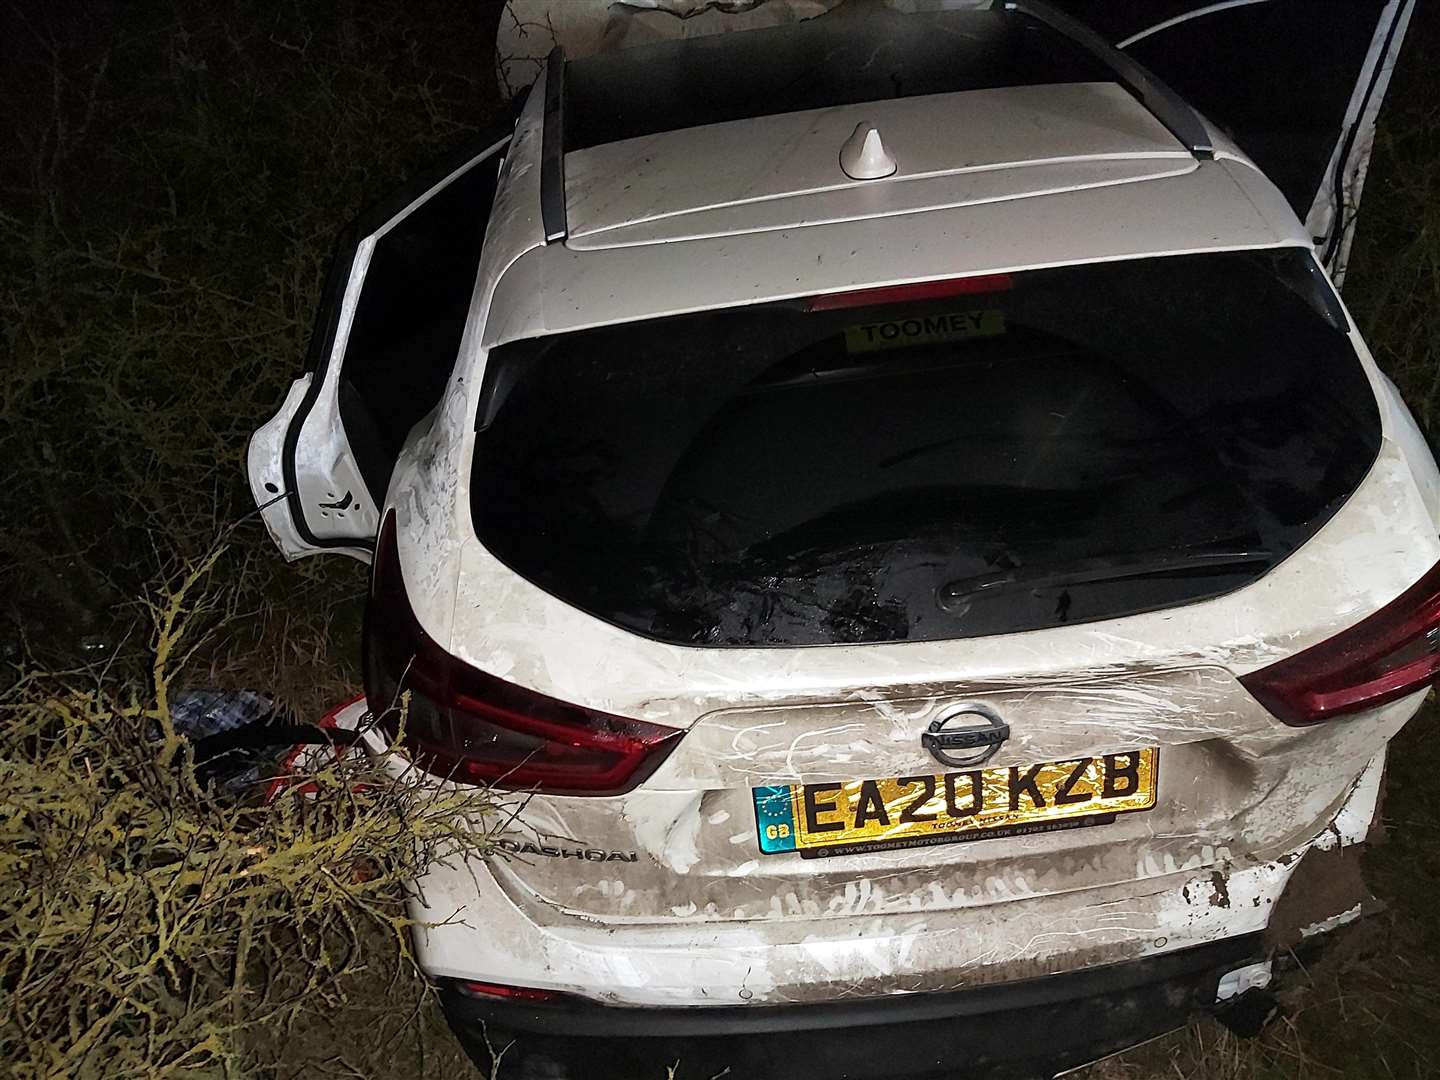 Hakeem Lewis-Harrison, of Rainbow Road, Erith has been jailed after crashing his Nissan car into trees before fleeing the scene in Grays, Essex leaving behind two women in the burning wreckage. Picture: Essex Police